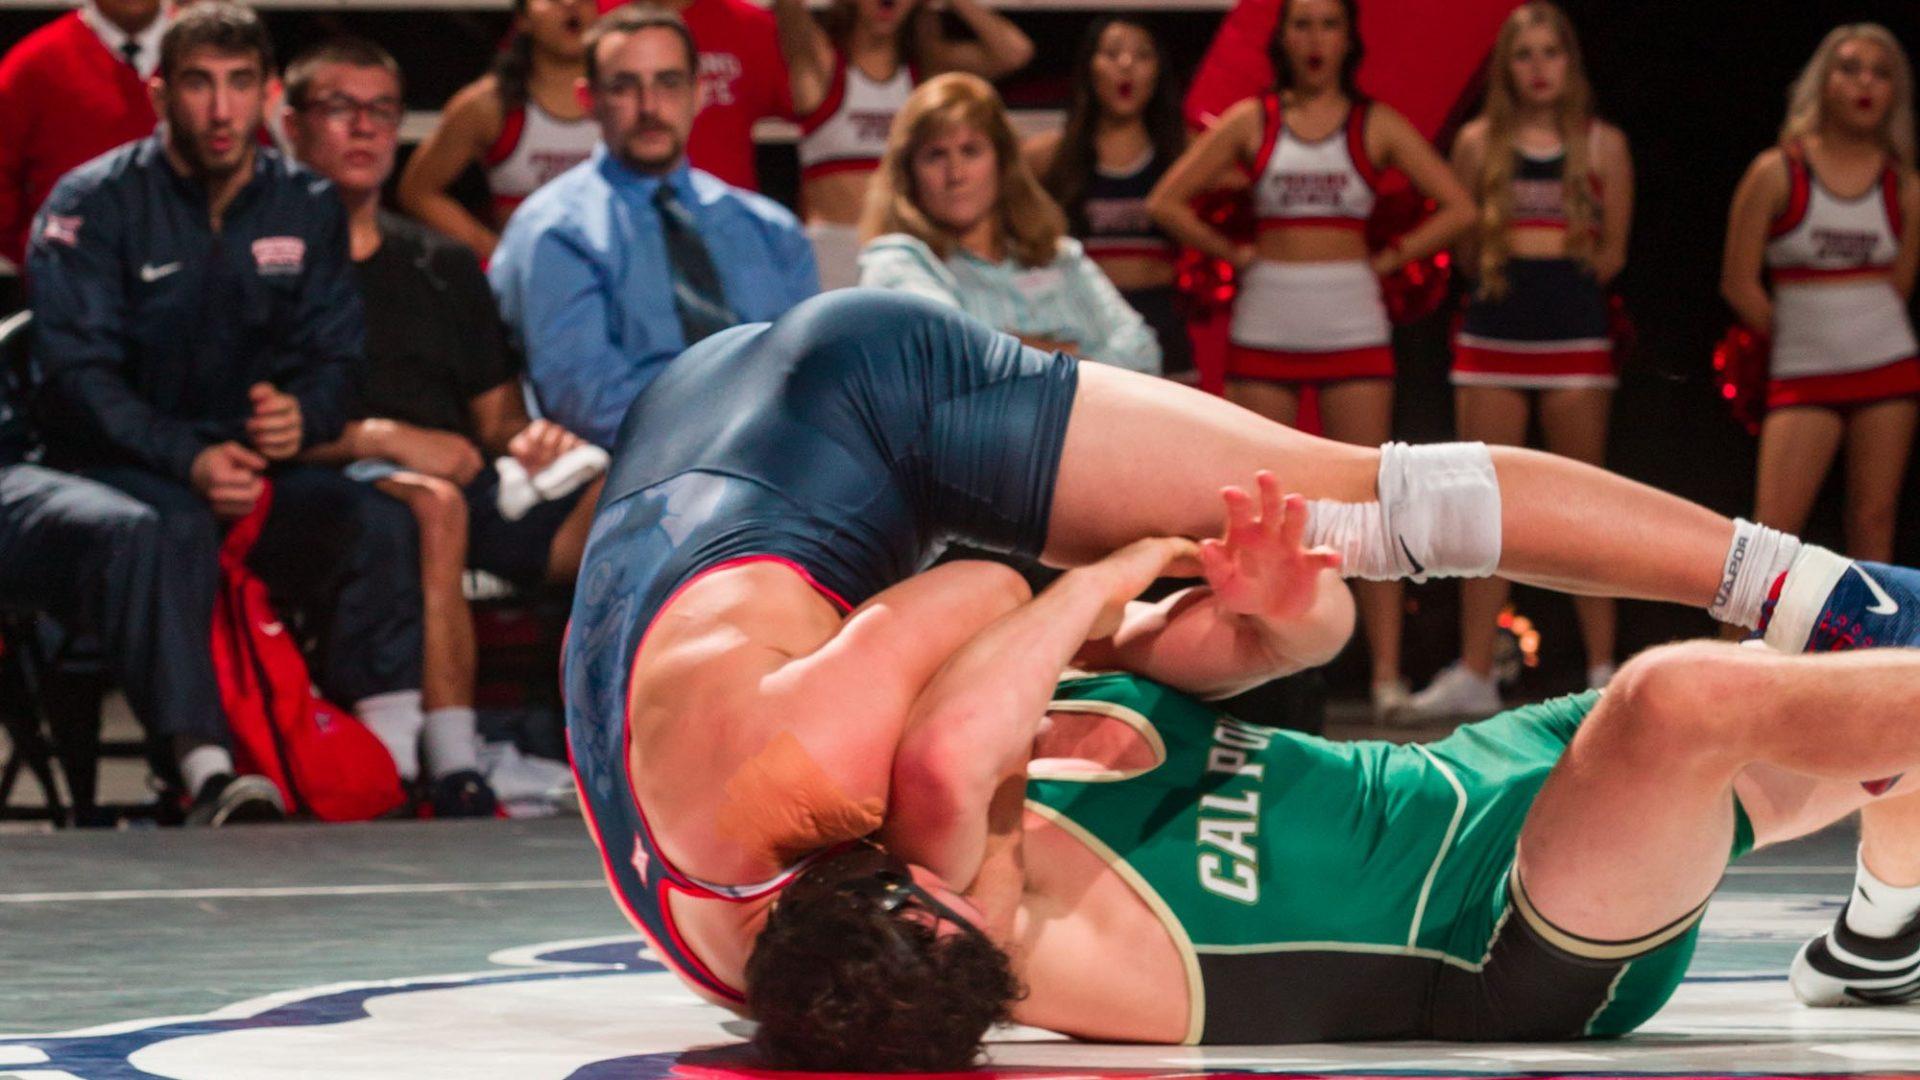 Sophomore+Josh+Hokit+made+Fresno+State+wrestling+debut+on+Dec.+4%2C+2017+against+Cal+Poly+at+the+Save+Mart+Center.+The+Dogs+defeated+Cal+Poly+29-13.+%28Fresno+State+Athletics%29